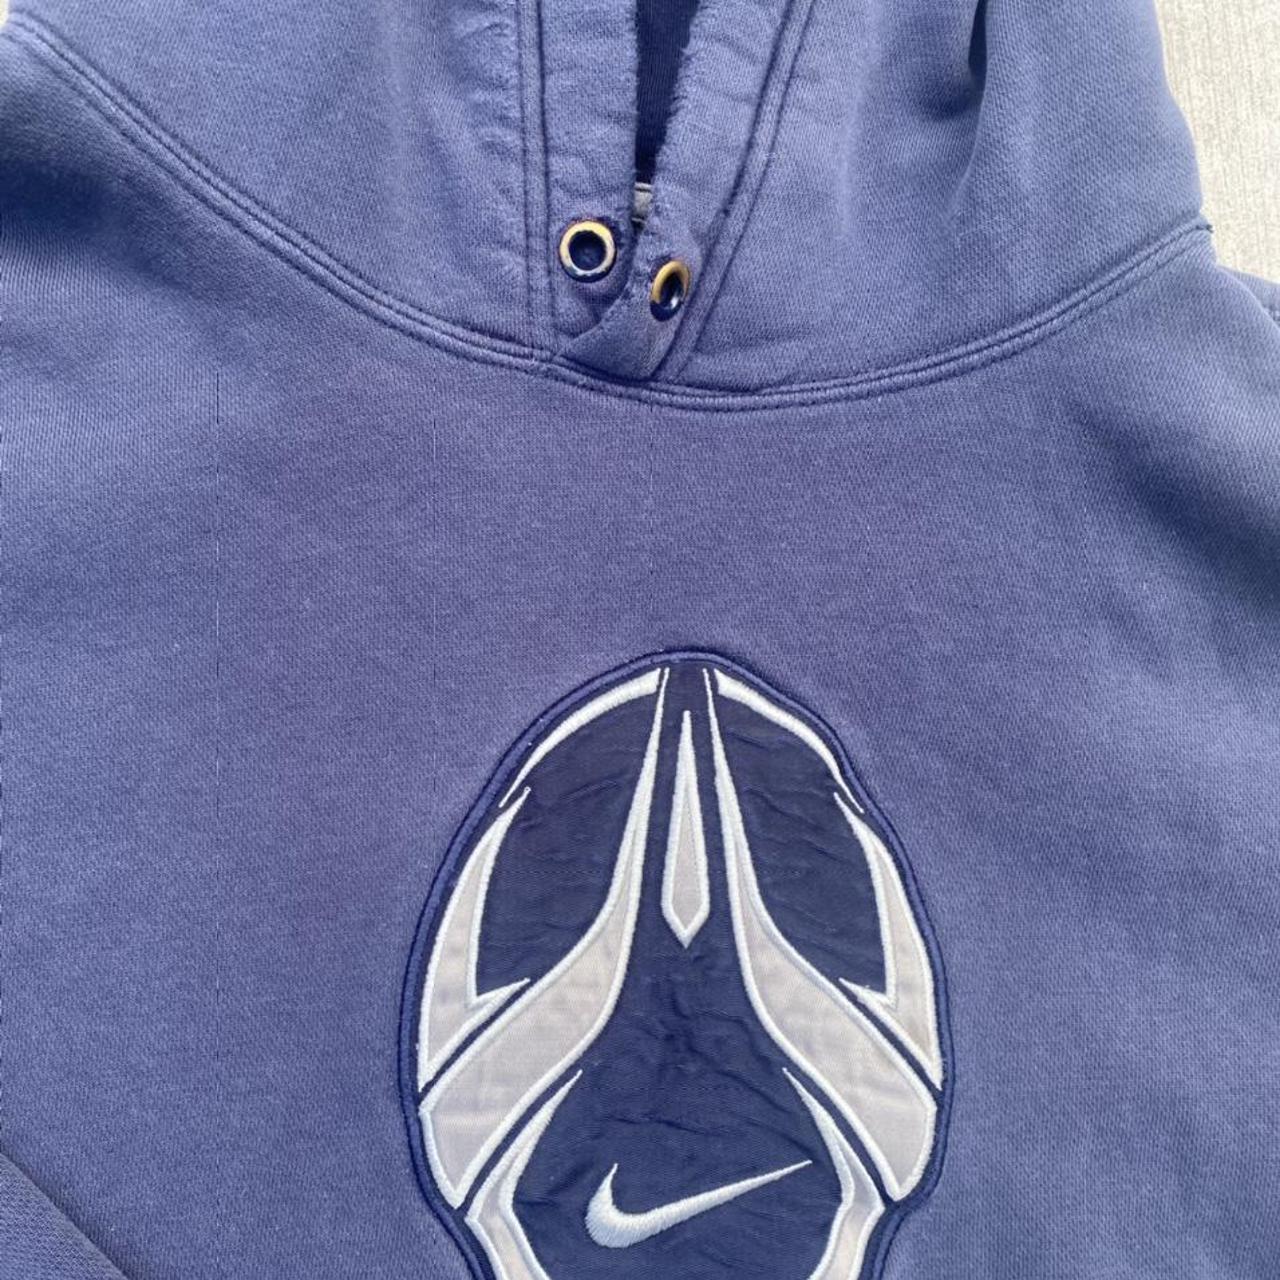 Product Image 2 - Nike football hoodie. Size XL